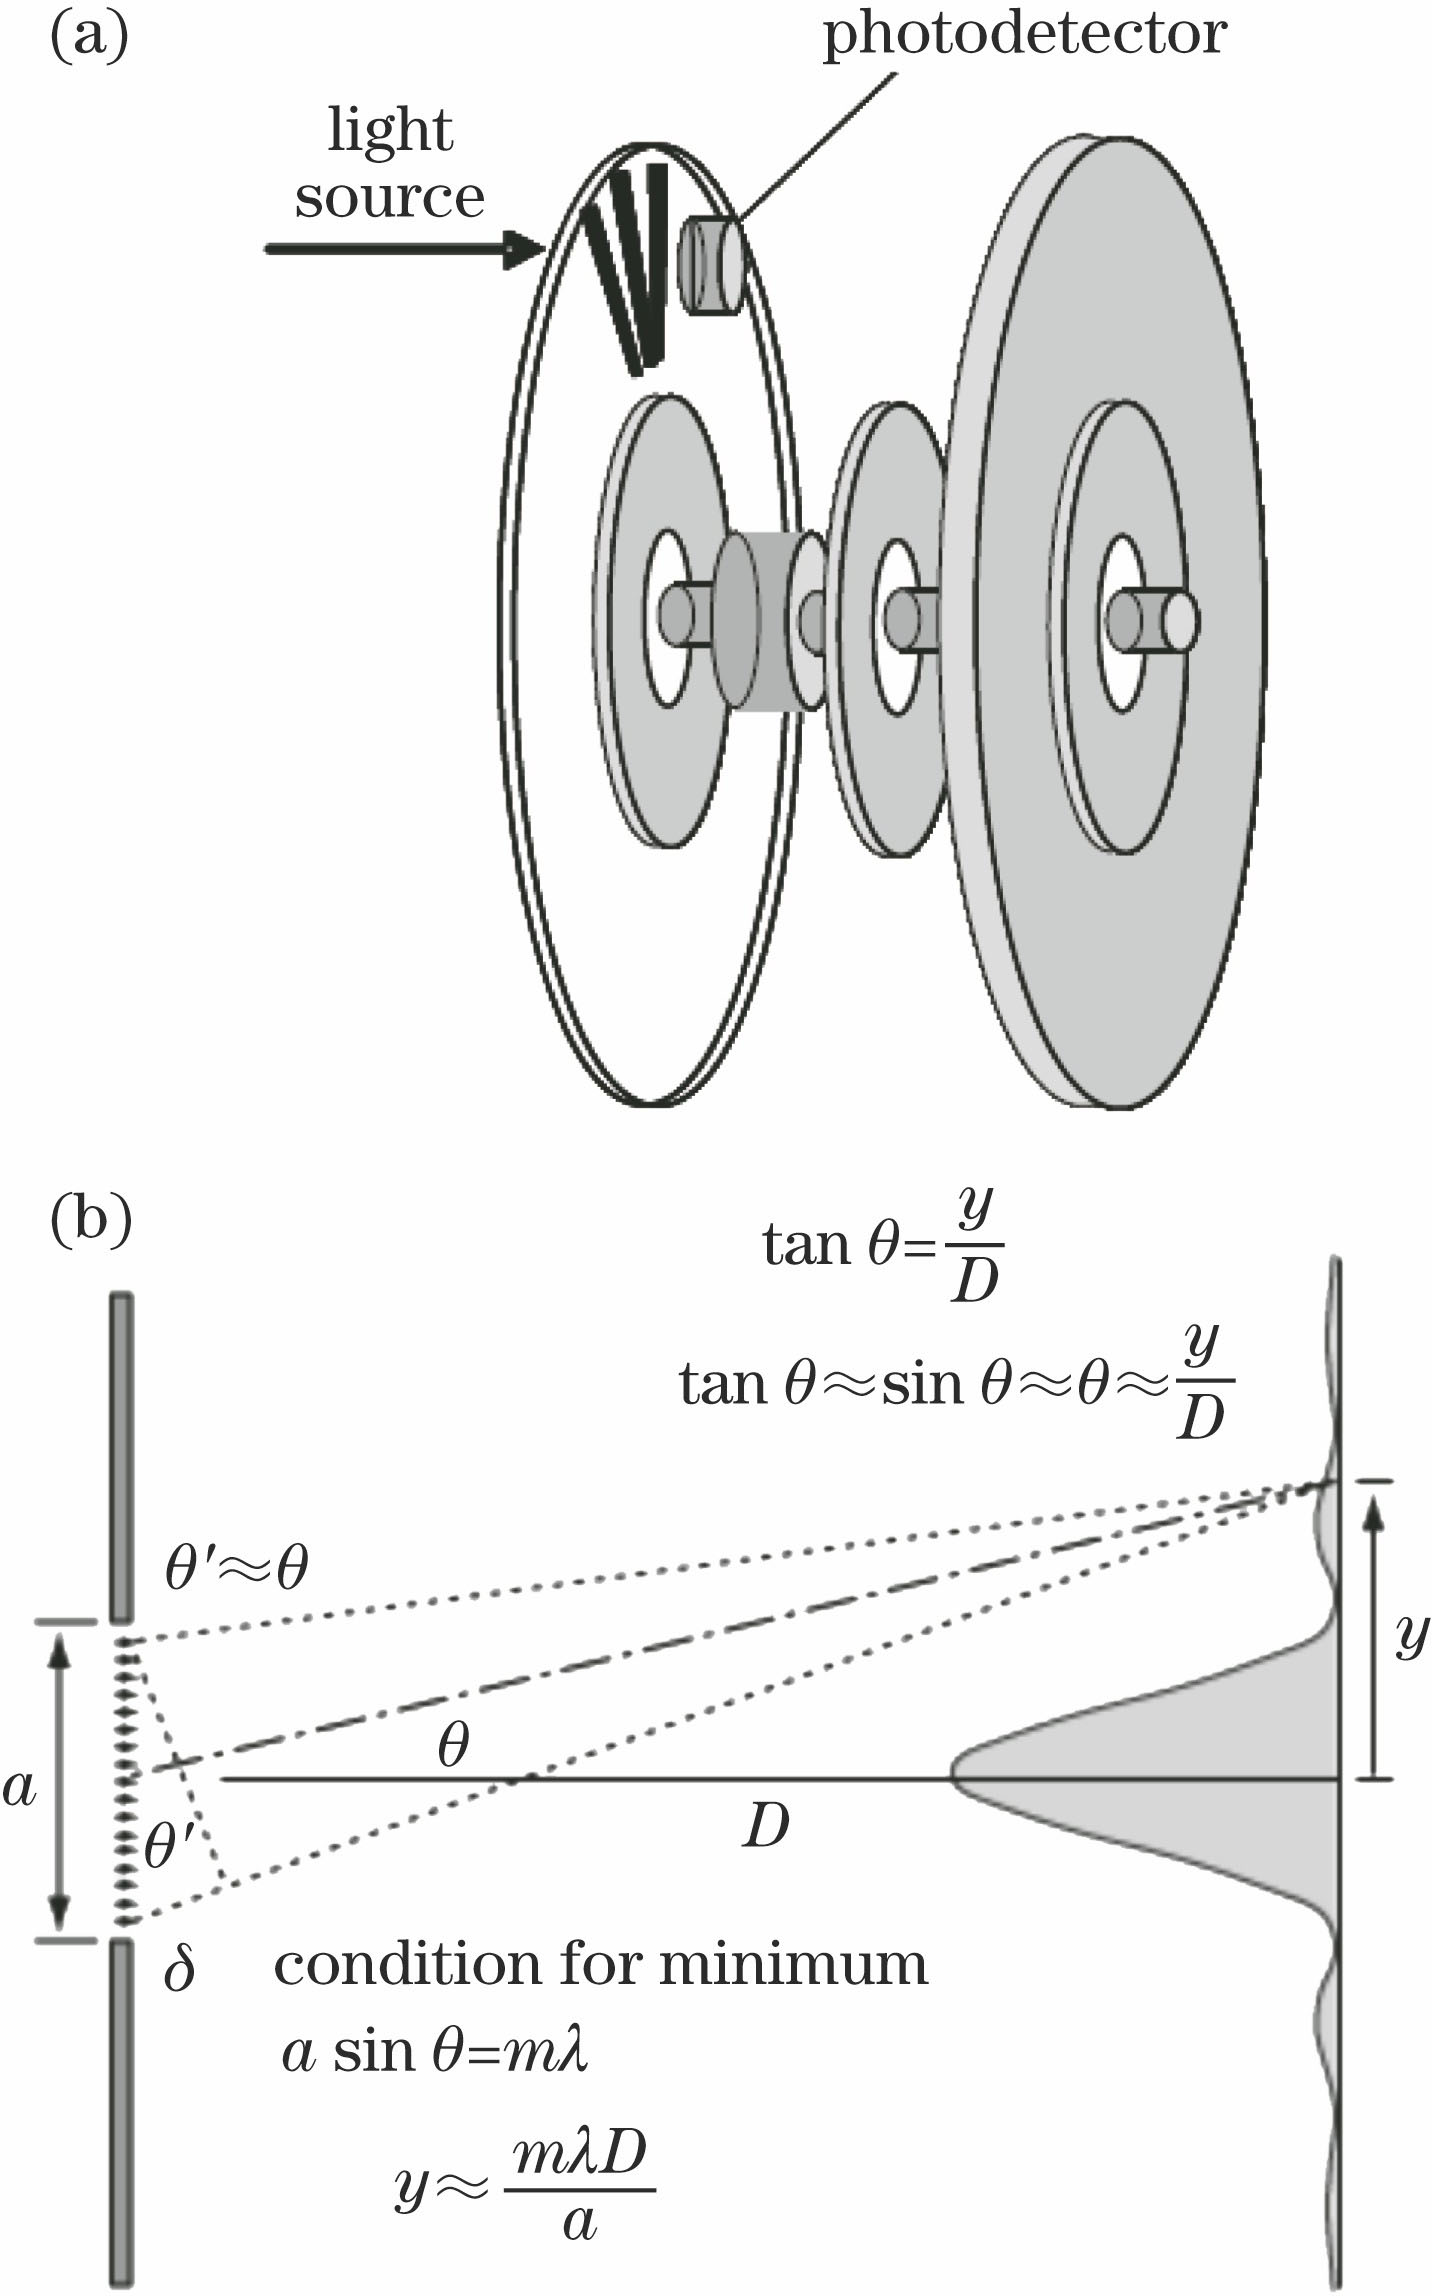 Diffraction principle of photographic encoder grating signal. (a) Schematic of the head of an encoder; (b) propagation of light diffraction